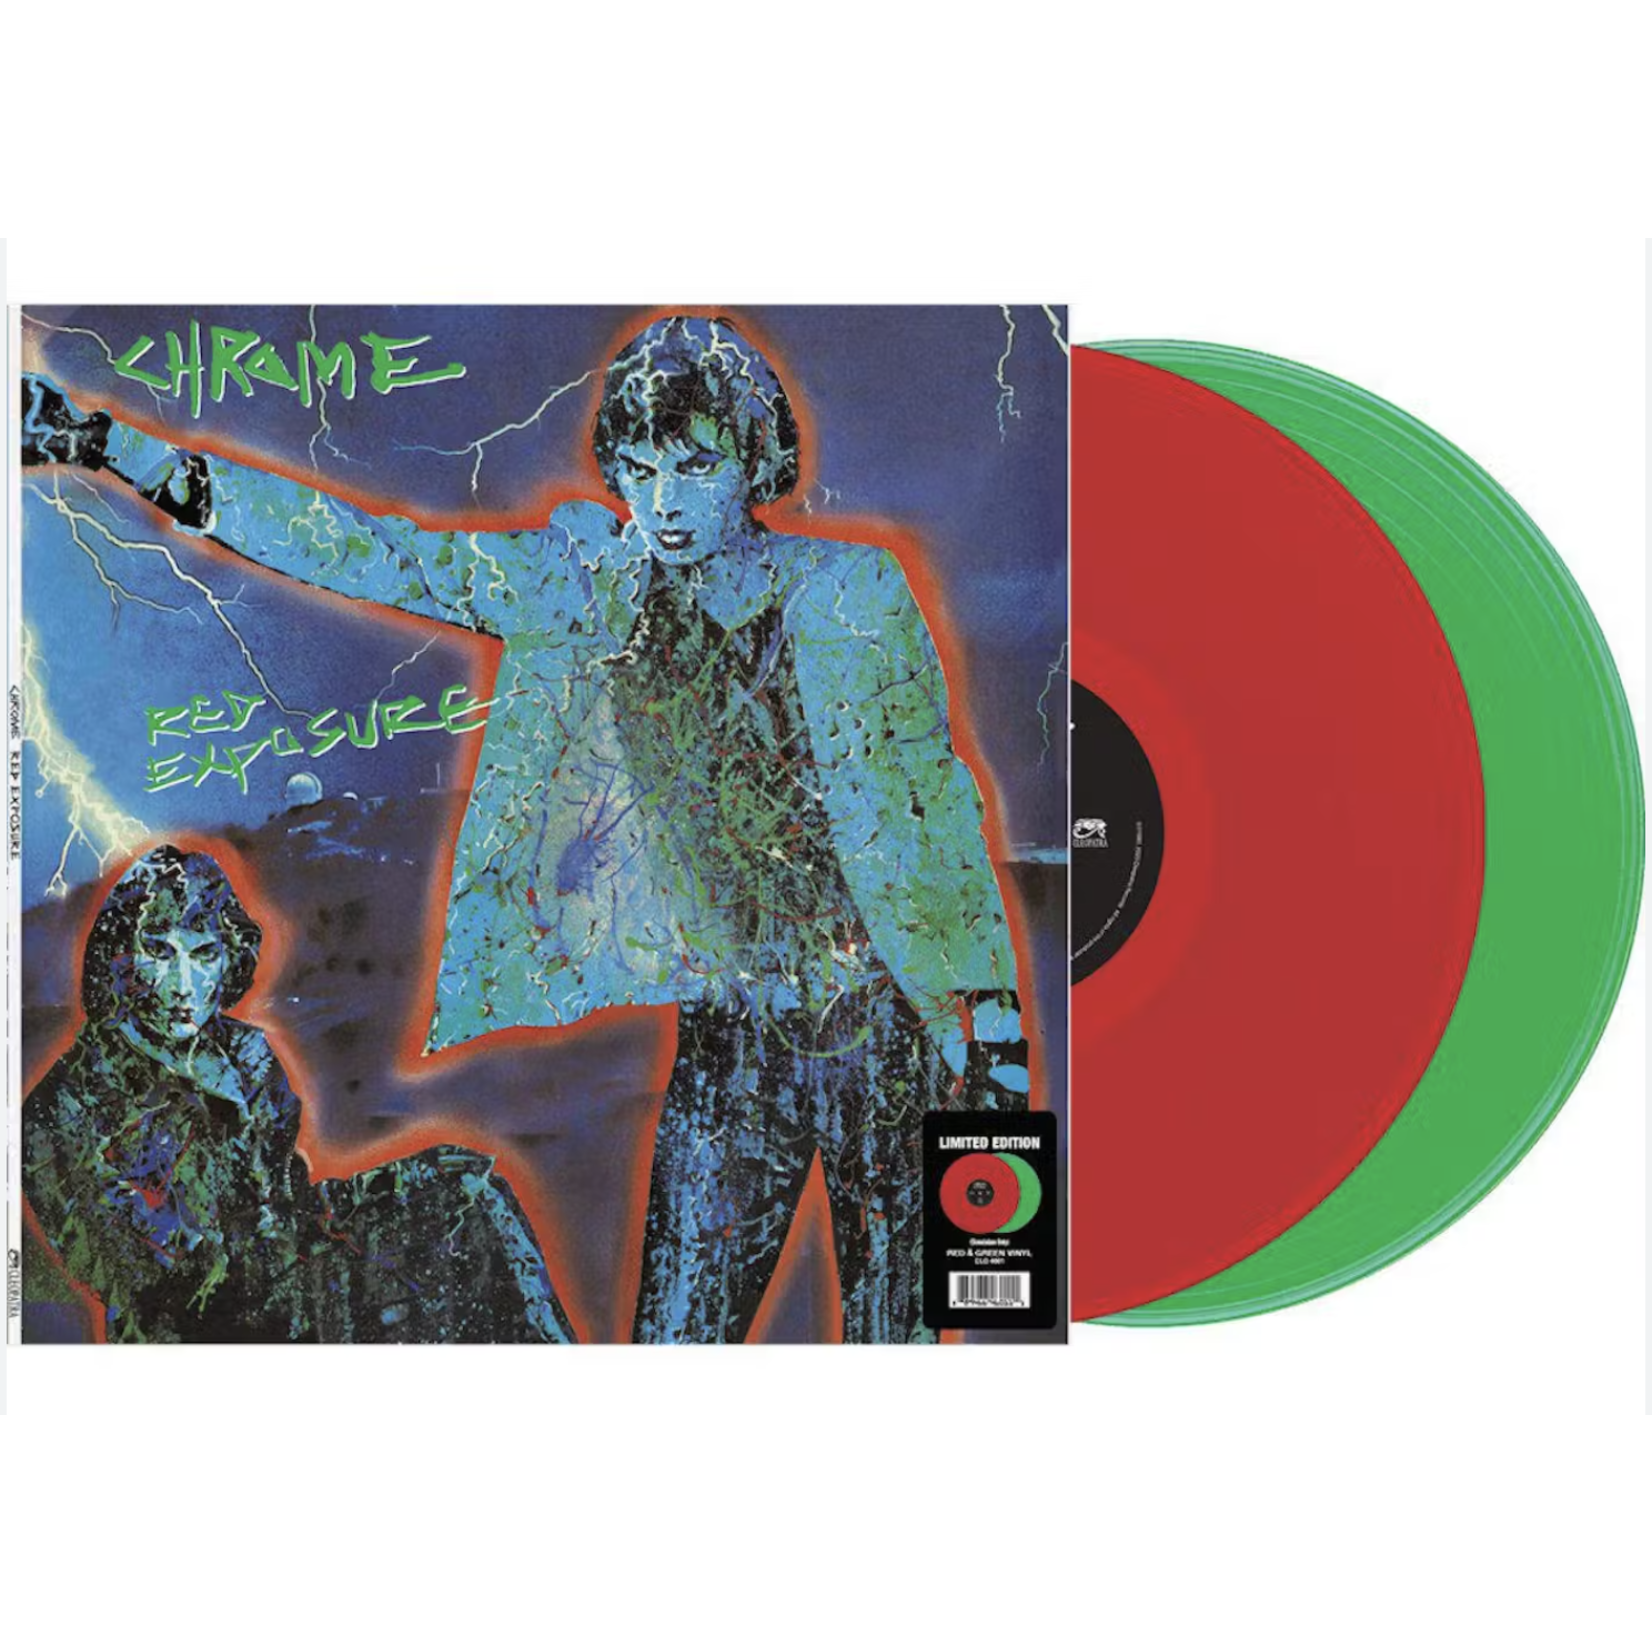 [New] Chrome: Red Exposure (2LP, red & green vinyl) [CLEOPATRA]